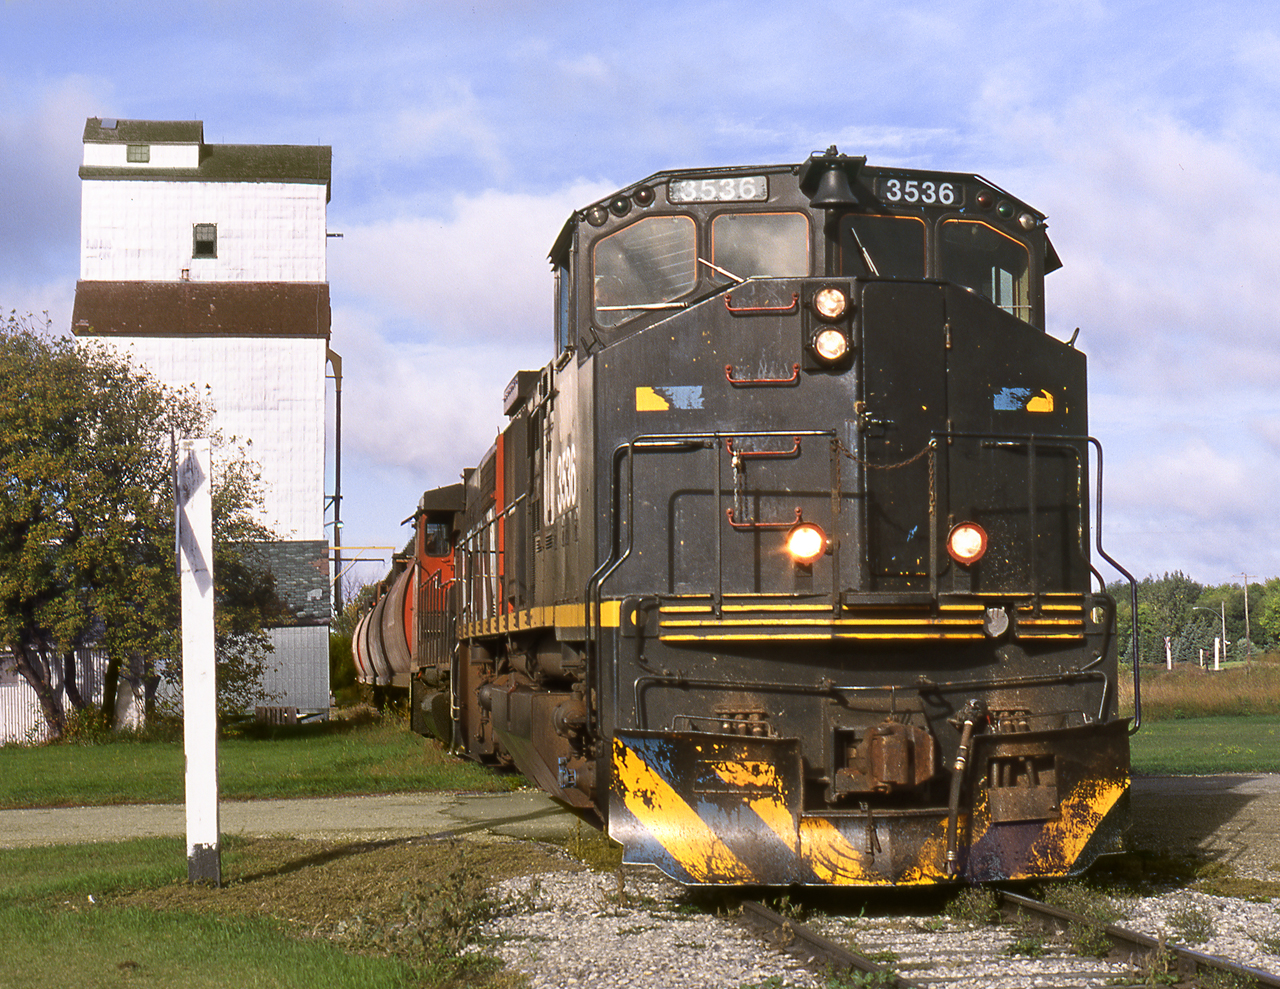 Eastbound Southern Manitoba Railway, who operated CN's former Morris to Elgin branch, picks up grain from the Baldur elevator. The line was originally built by the Northern Pacific to Brandon in 1889 and was a founding component of Canadian Northern.